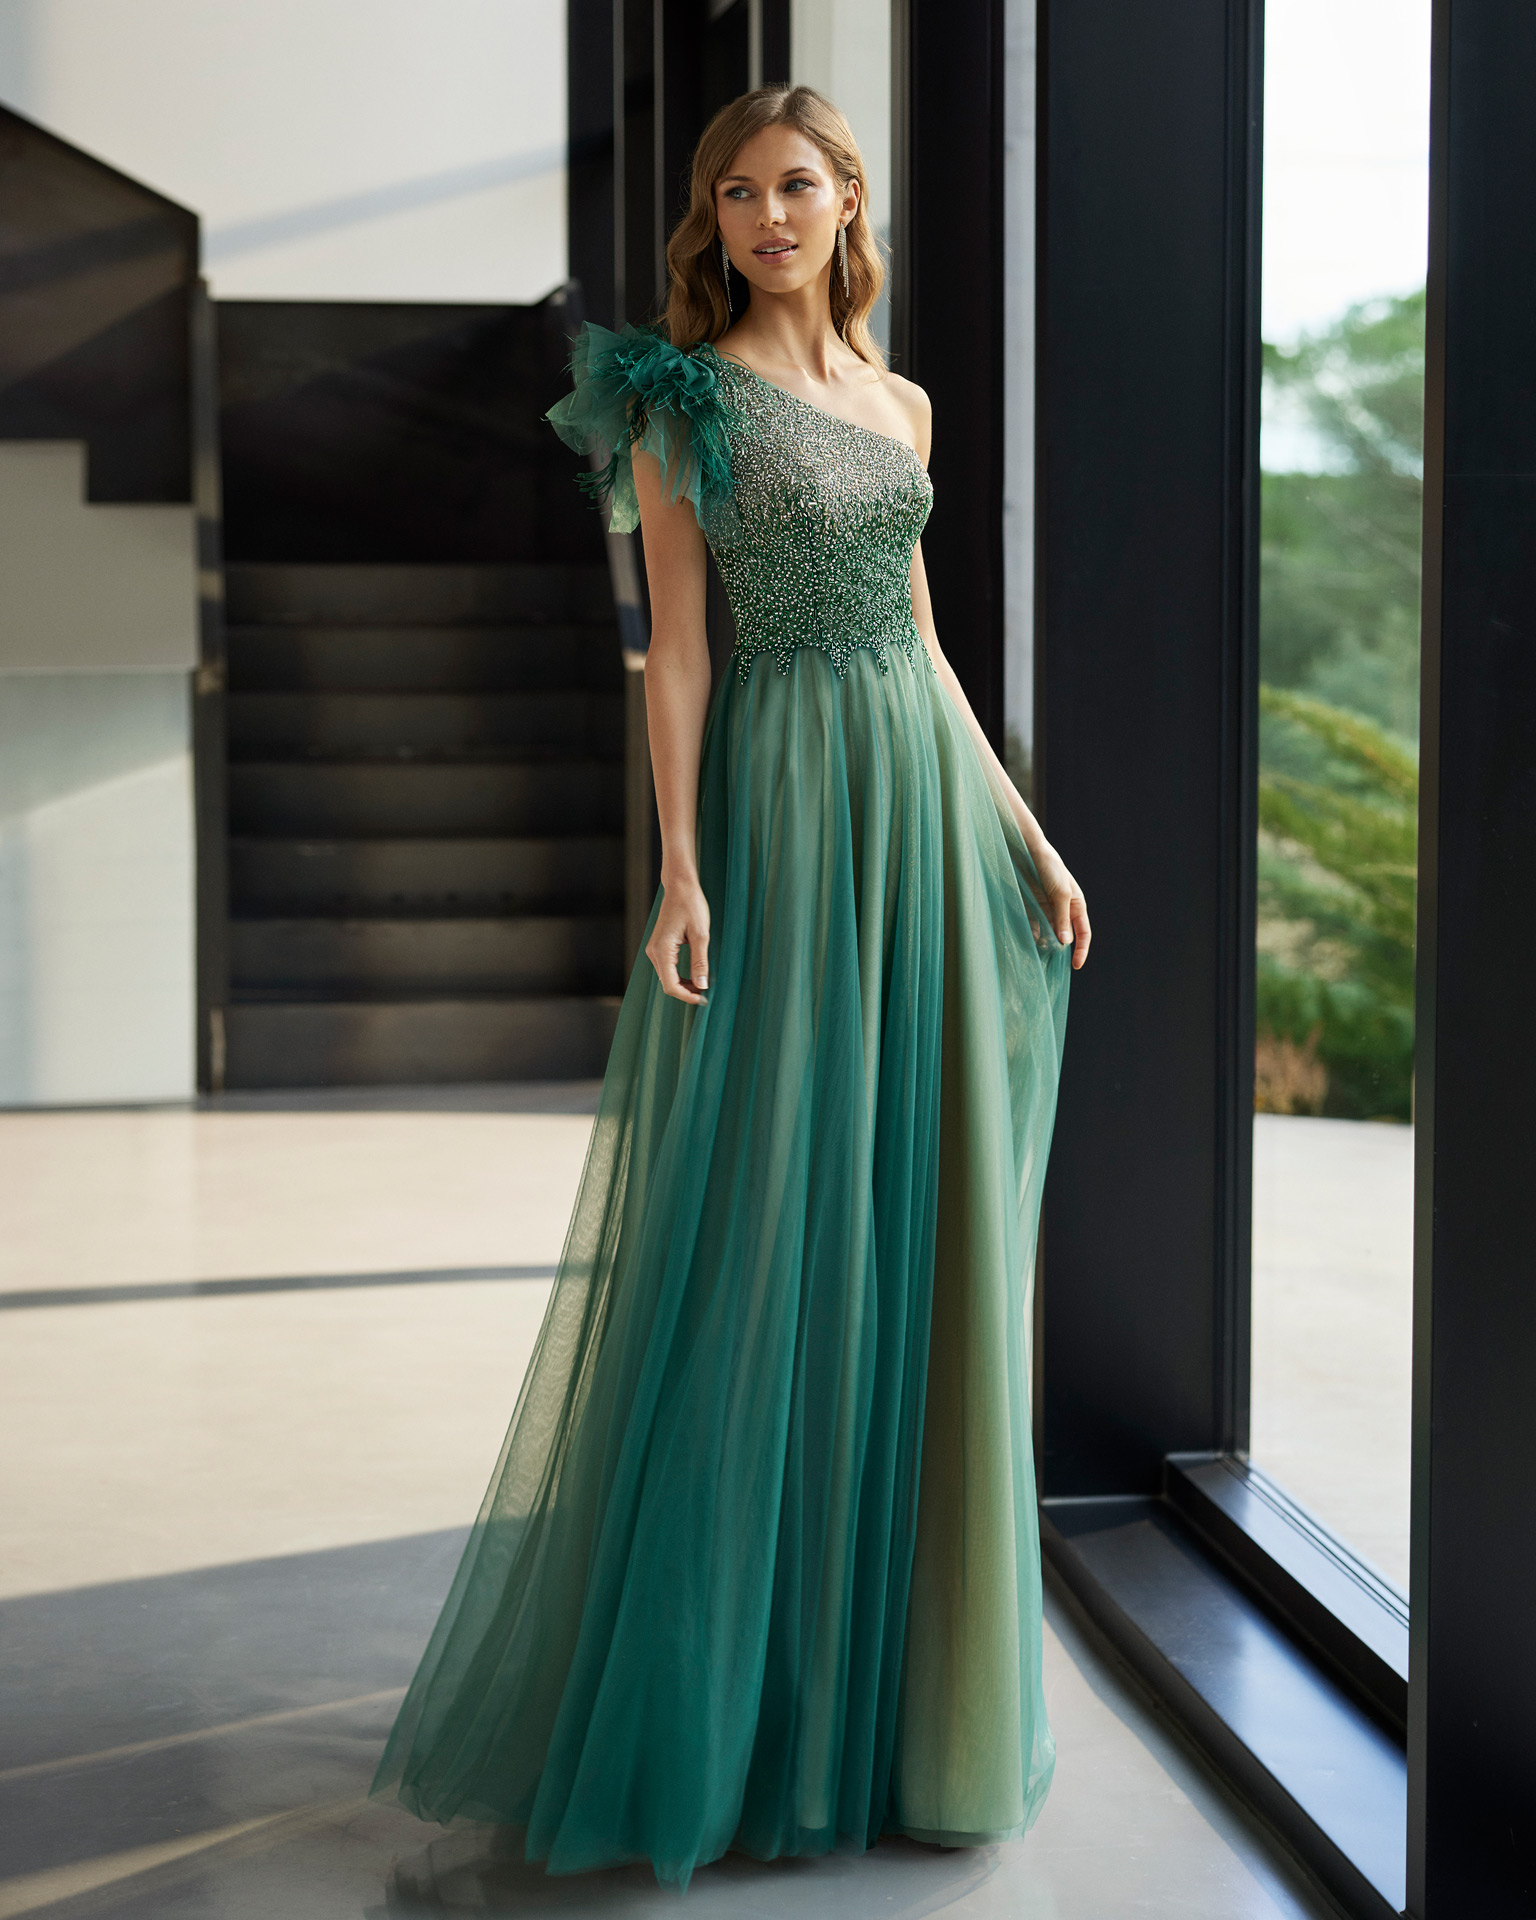 Fairytale style long cocktail dress. Made of tulle embellished with beadwork. With asymmetrical neckline and feathers. Marfil Barcelona look for parties and celebrations. MARFIL_BARCELONA.